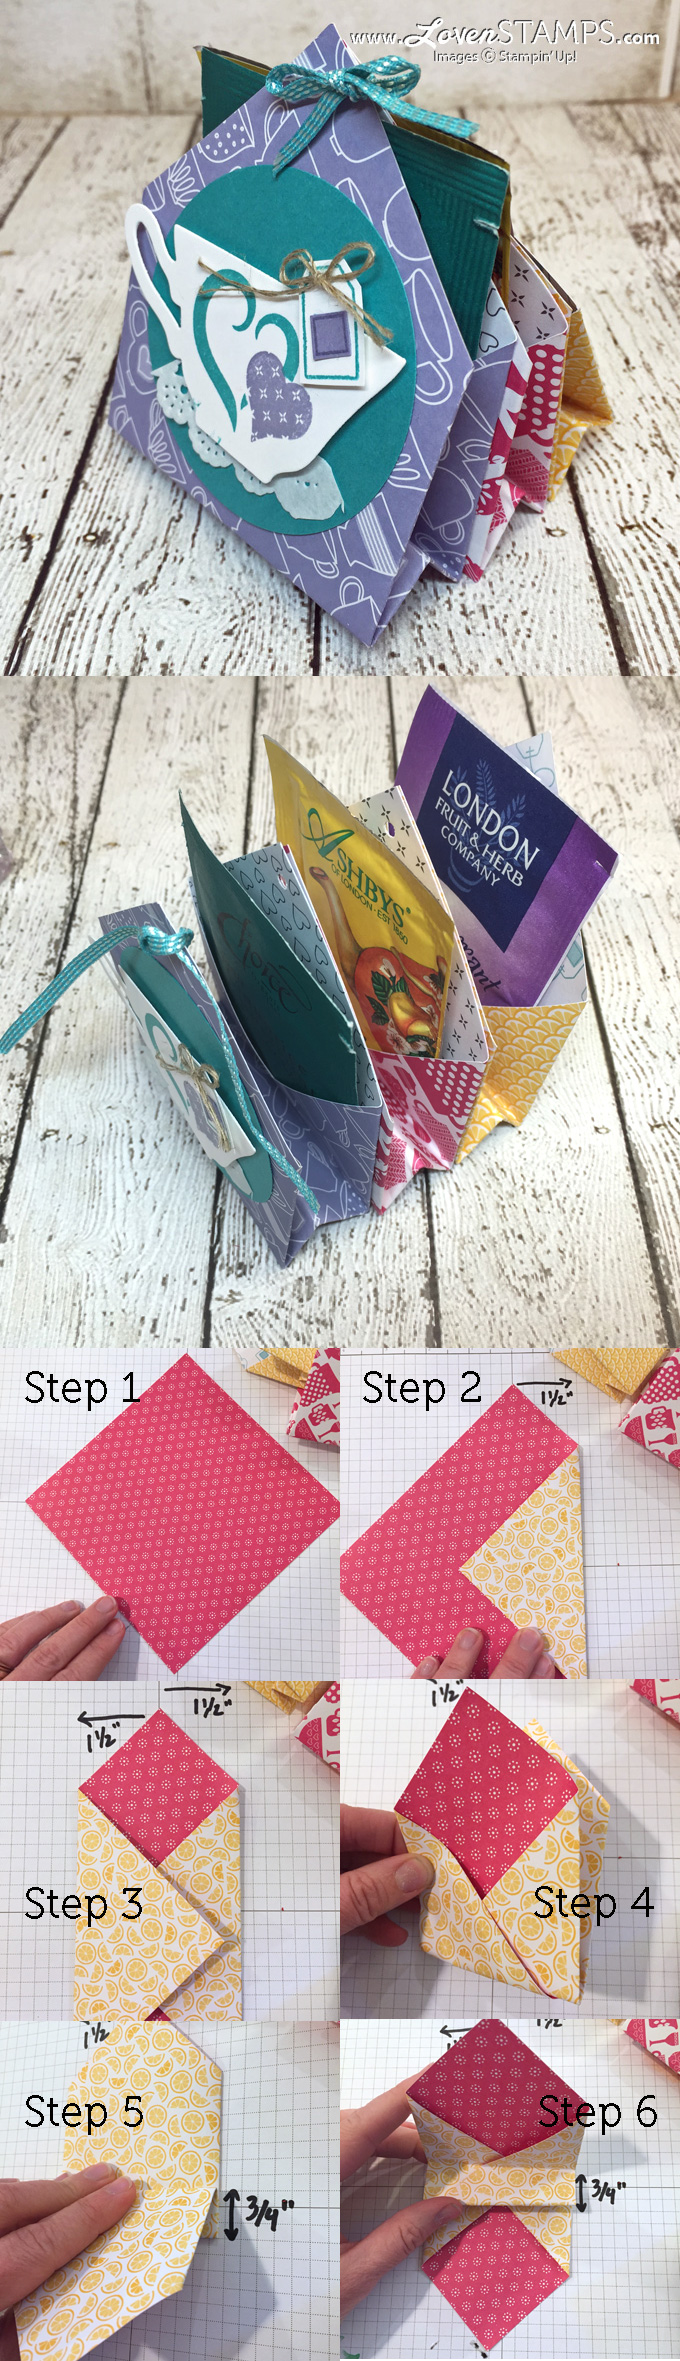 LovenStamps: A Nice Cuppa - Video Tutorial for 6 pocket treats and tea bag holder - Mini Gift Idea for Stamps in the Mail Club with Meg (all supplies Stampin' Up!) - get your kit at LovenStamps